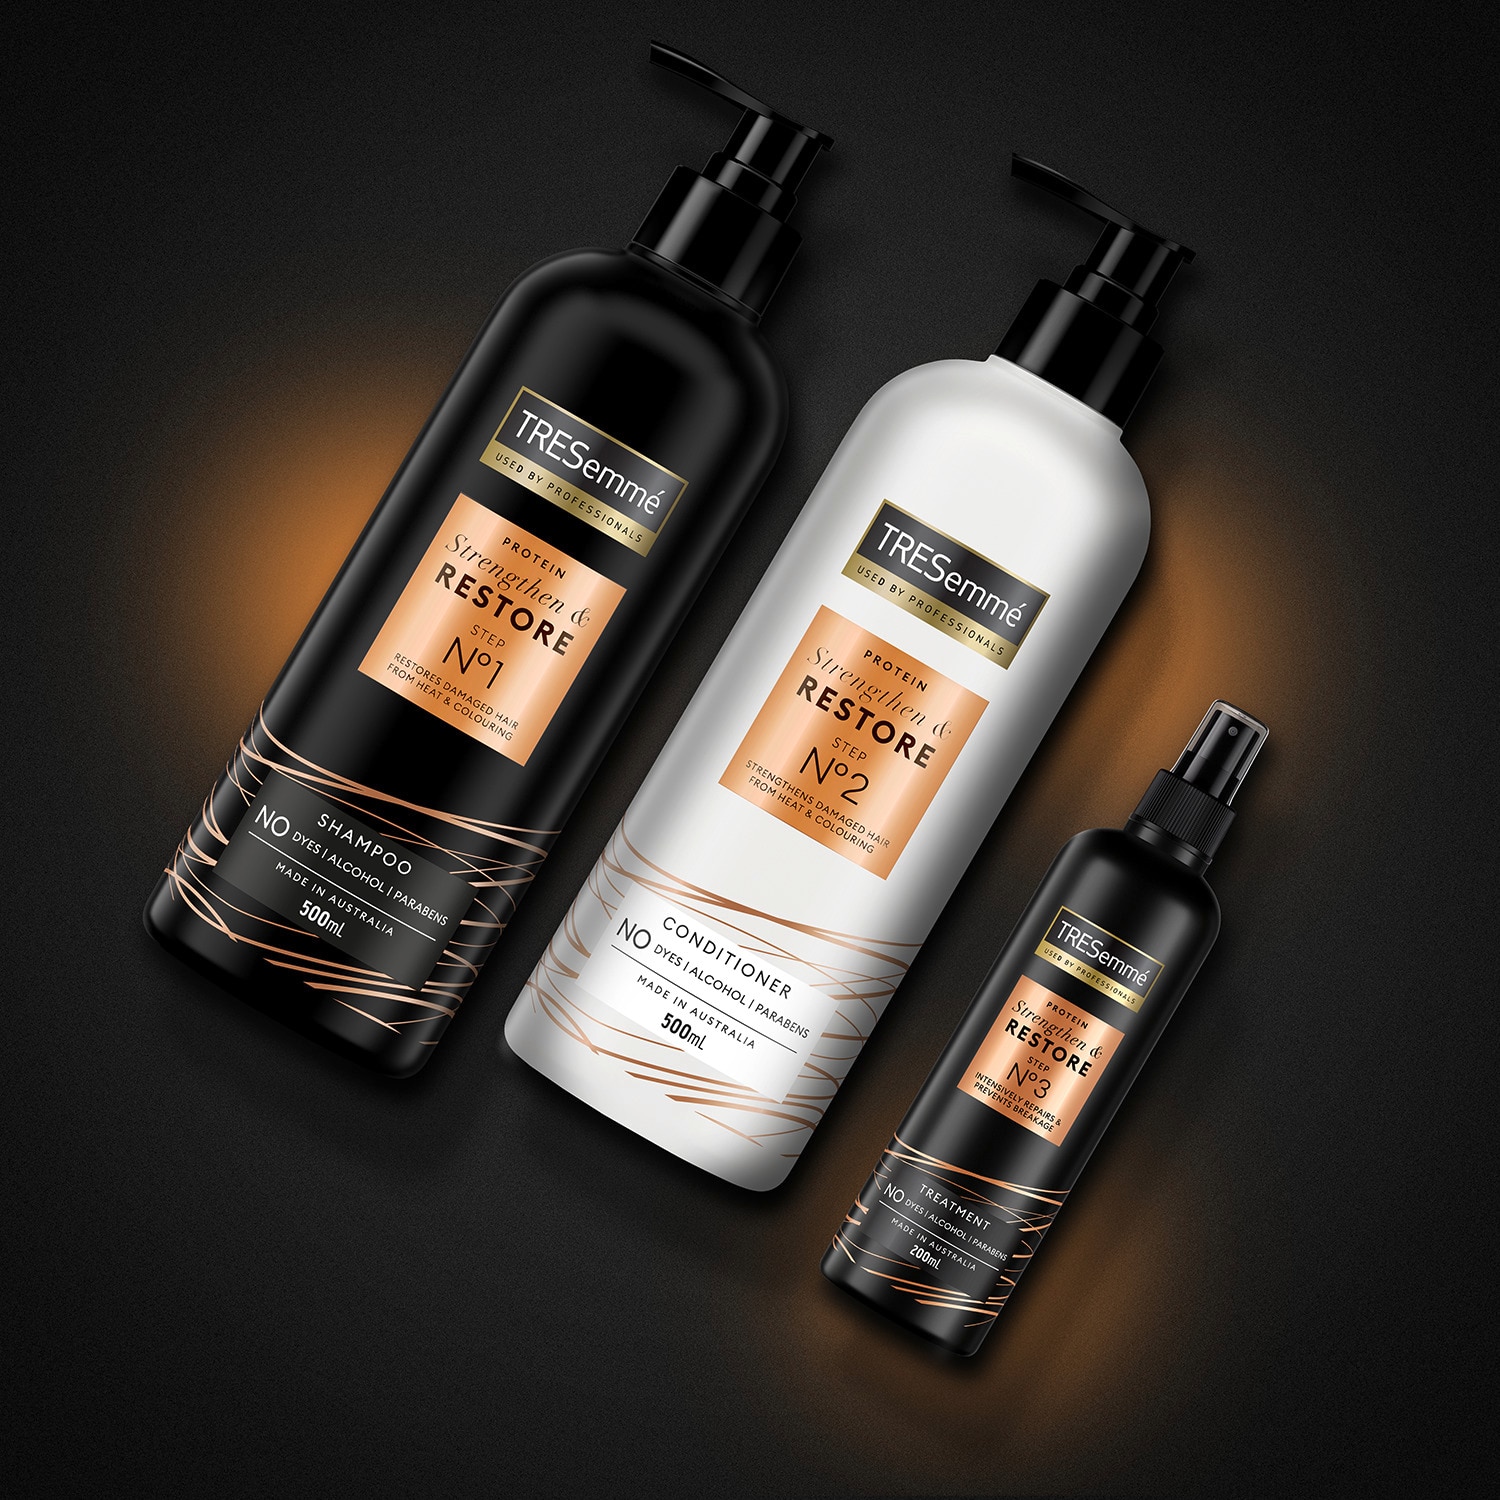 Product shot of TRESemmé Strengthen & Restore shampoo, conditioner, and treatment